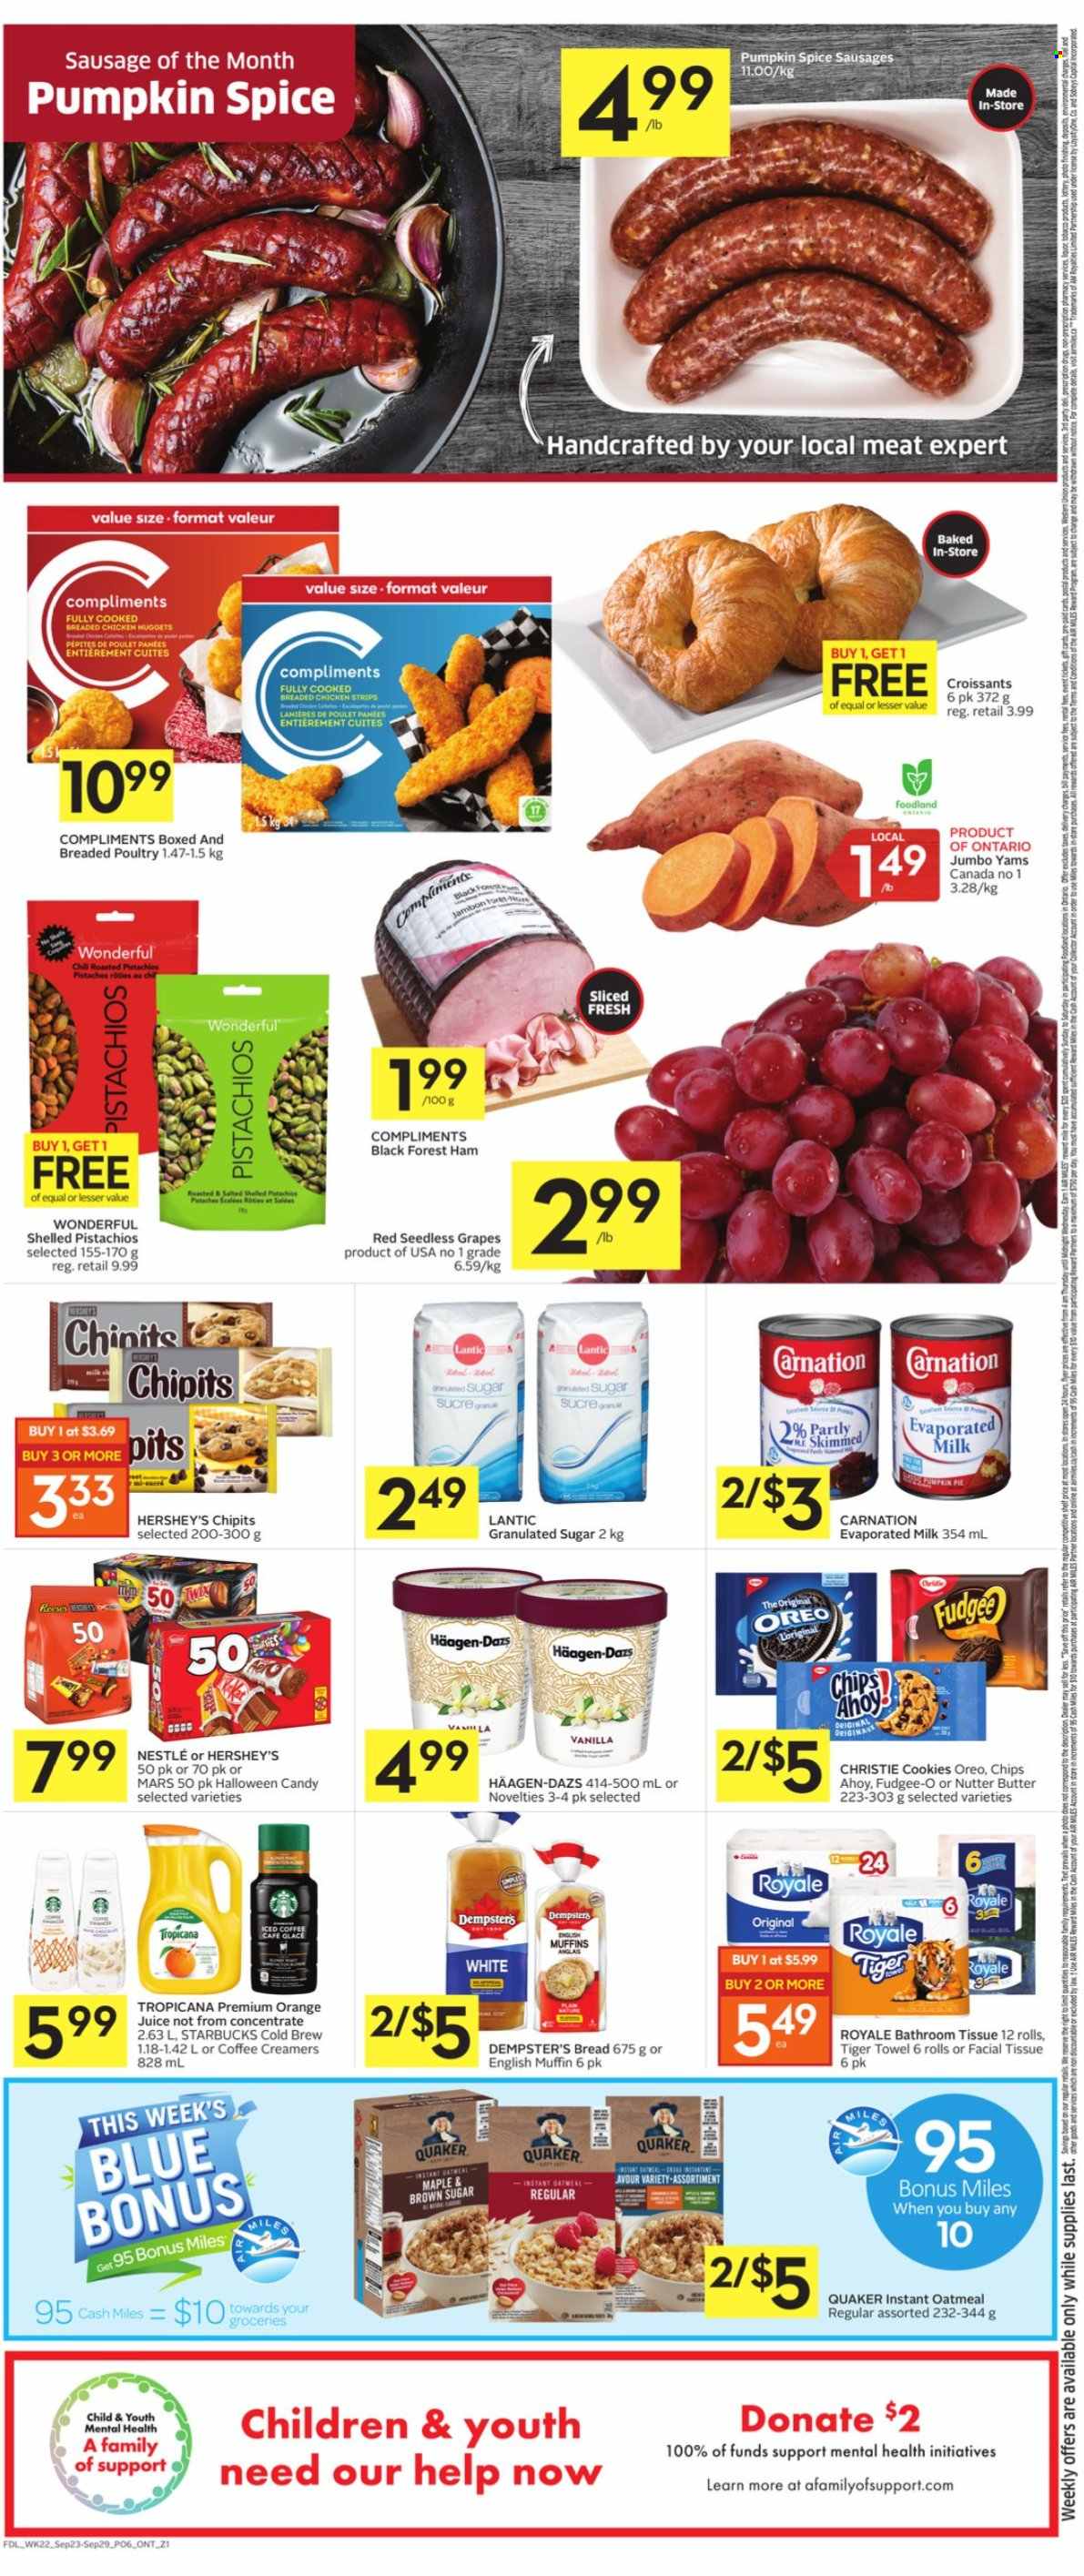 thumbnail - Foodland Flyer - September 23, 2021 - September 29, 2021 - Sales products - bread, english muffins, croissant, muffin, grapes, seedless grapes, nuggets, fried chicken, chicken nuggets, Quaker, ham, sausage, evaporated milk, butter, Hershey's, Häagen-Dazs, strips, chicken strips, cookies, fudge, Mars, granulated sugar, oatmeal, spice, pistachios, orange juice, juice, iced coffee, Starbucks, Oreo, Nestlé, chips. Page 6.